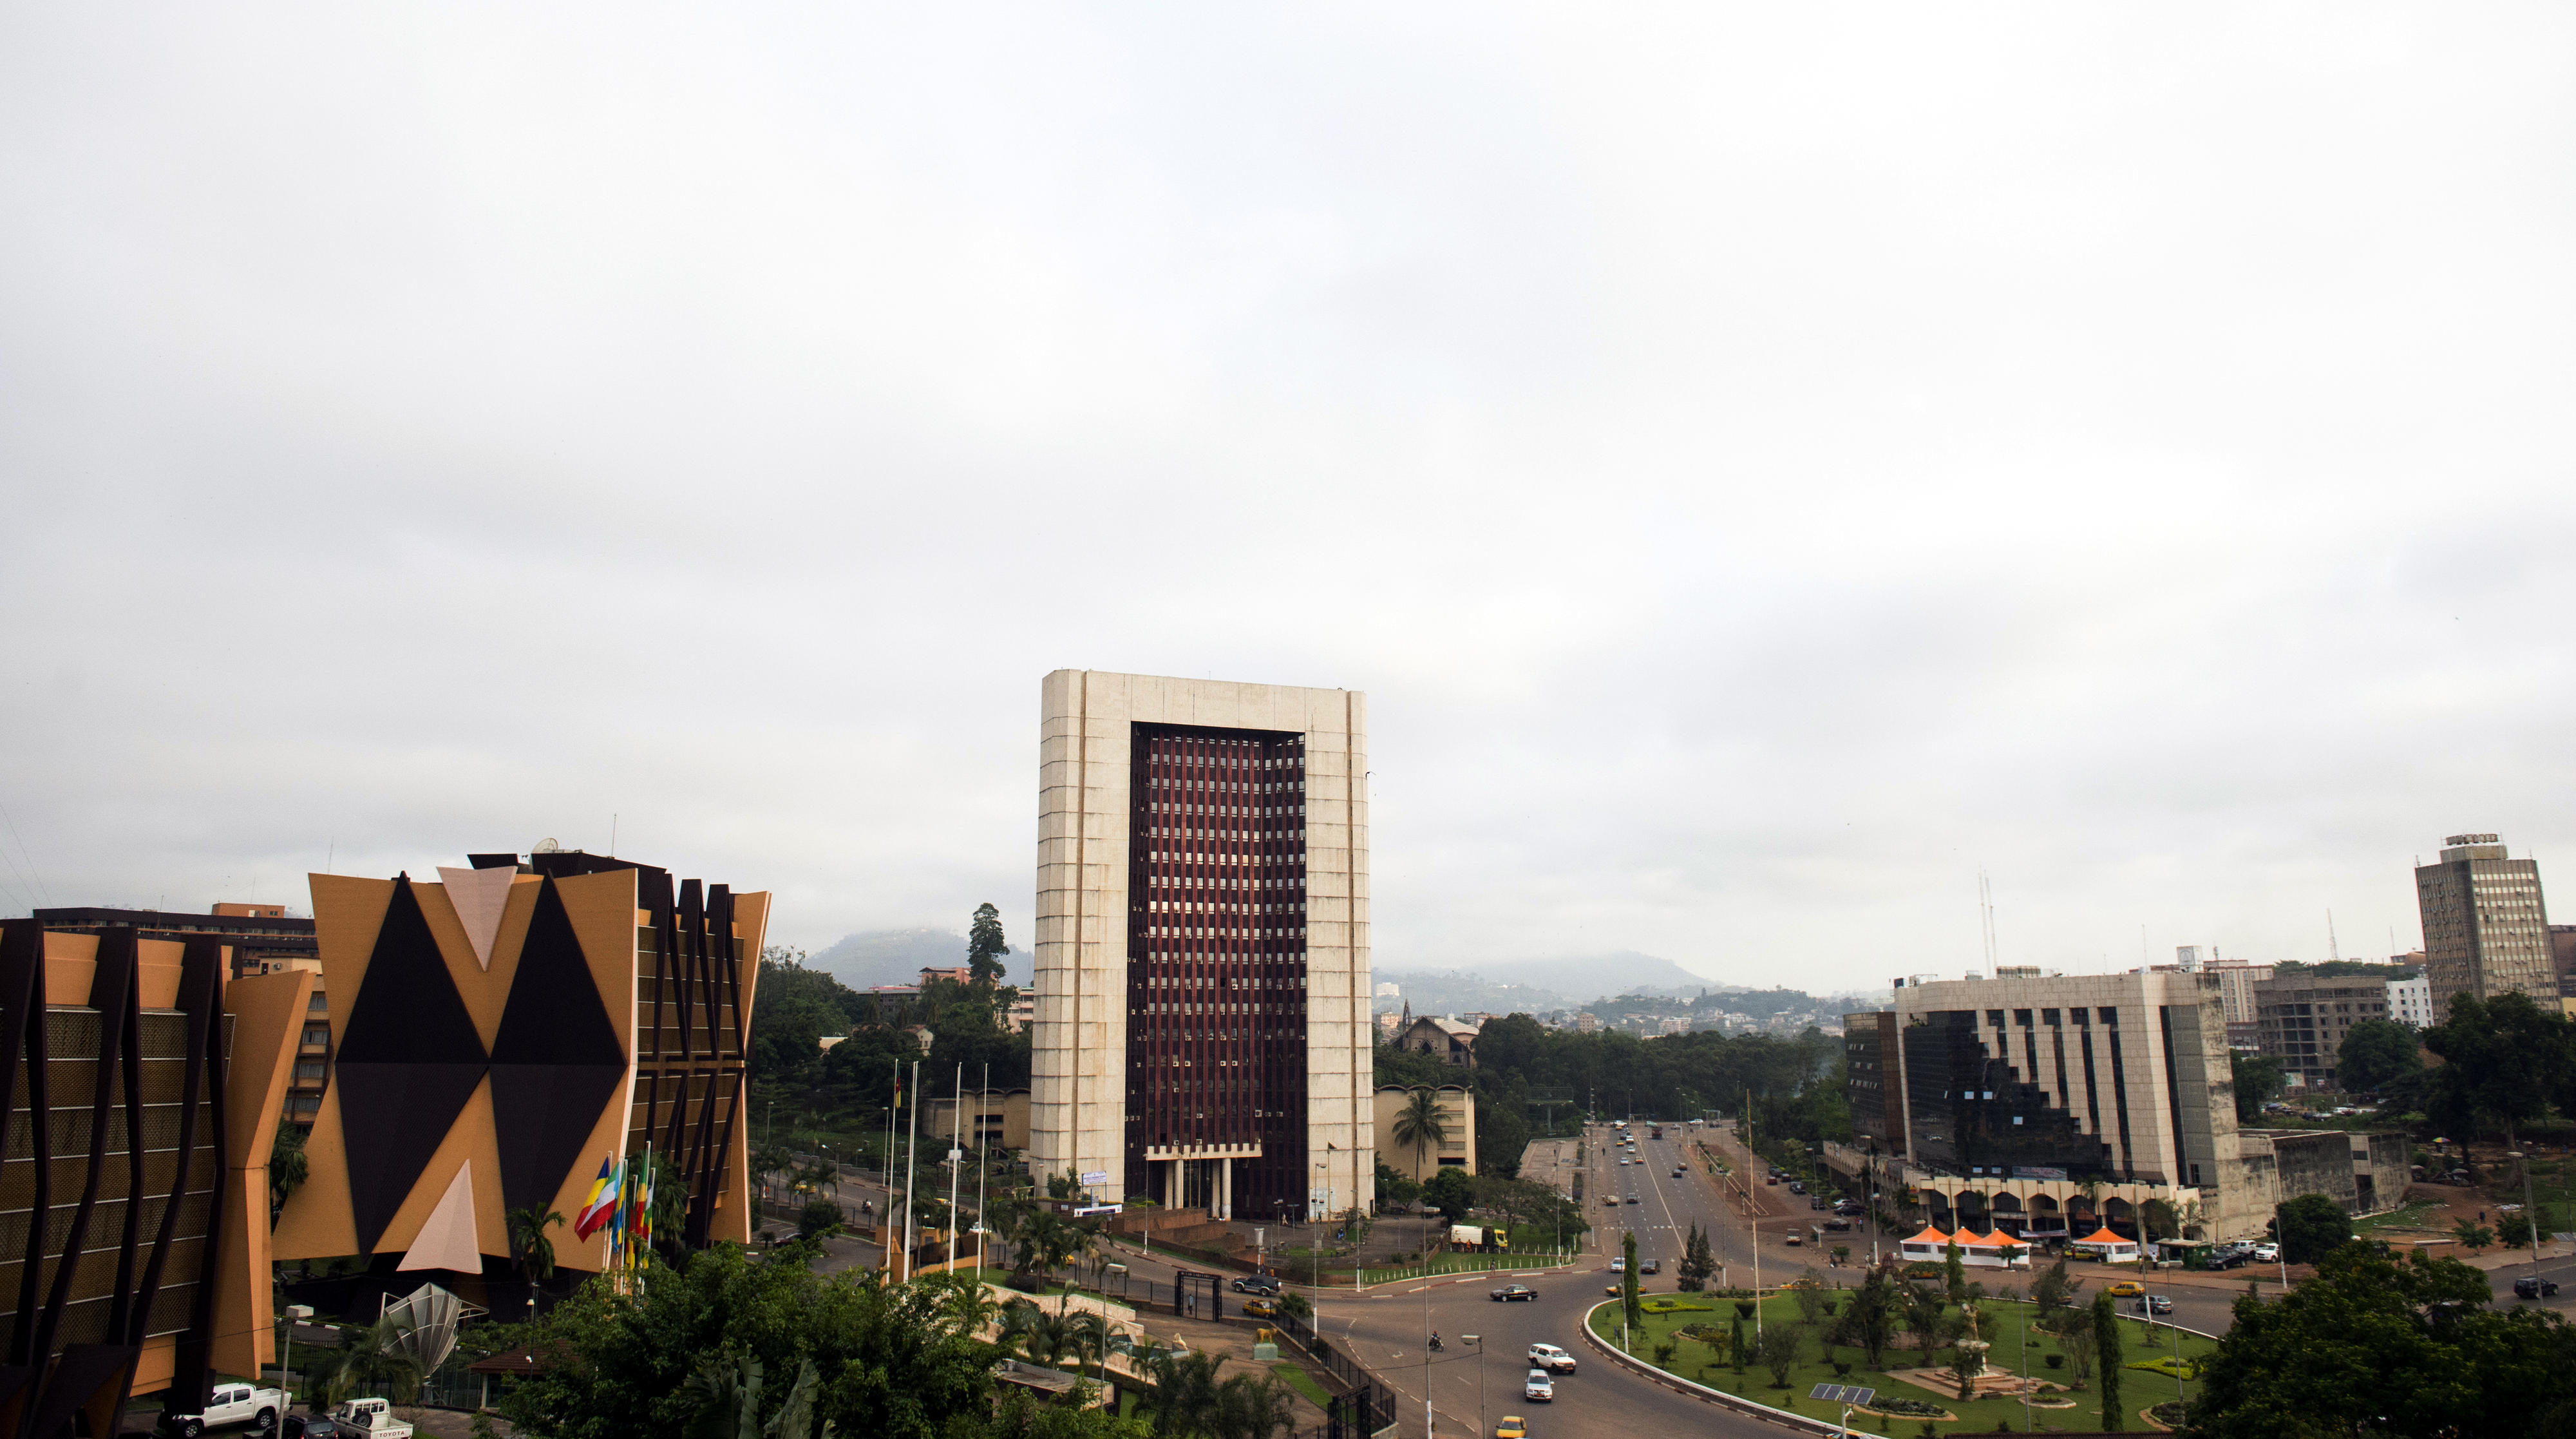 City view of Yaoundé, capital of Cameroon